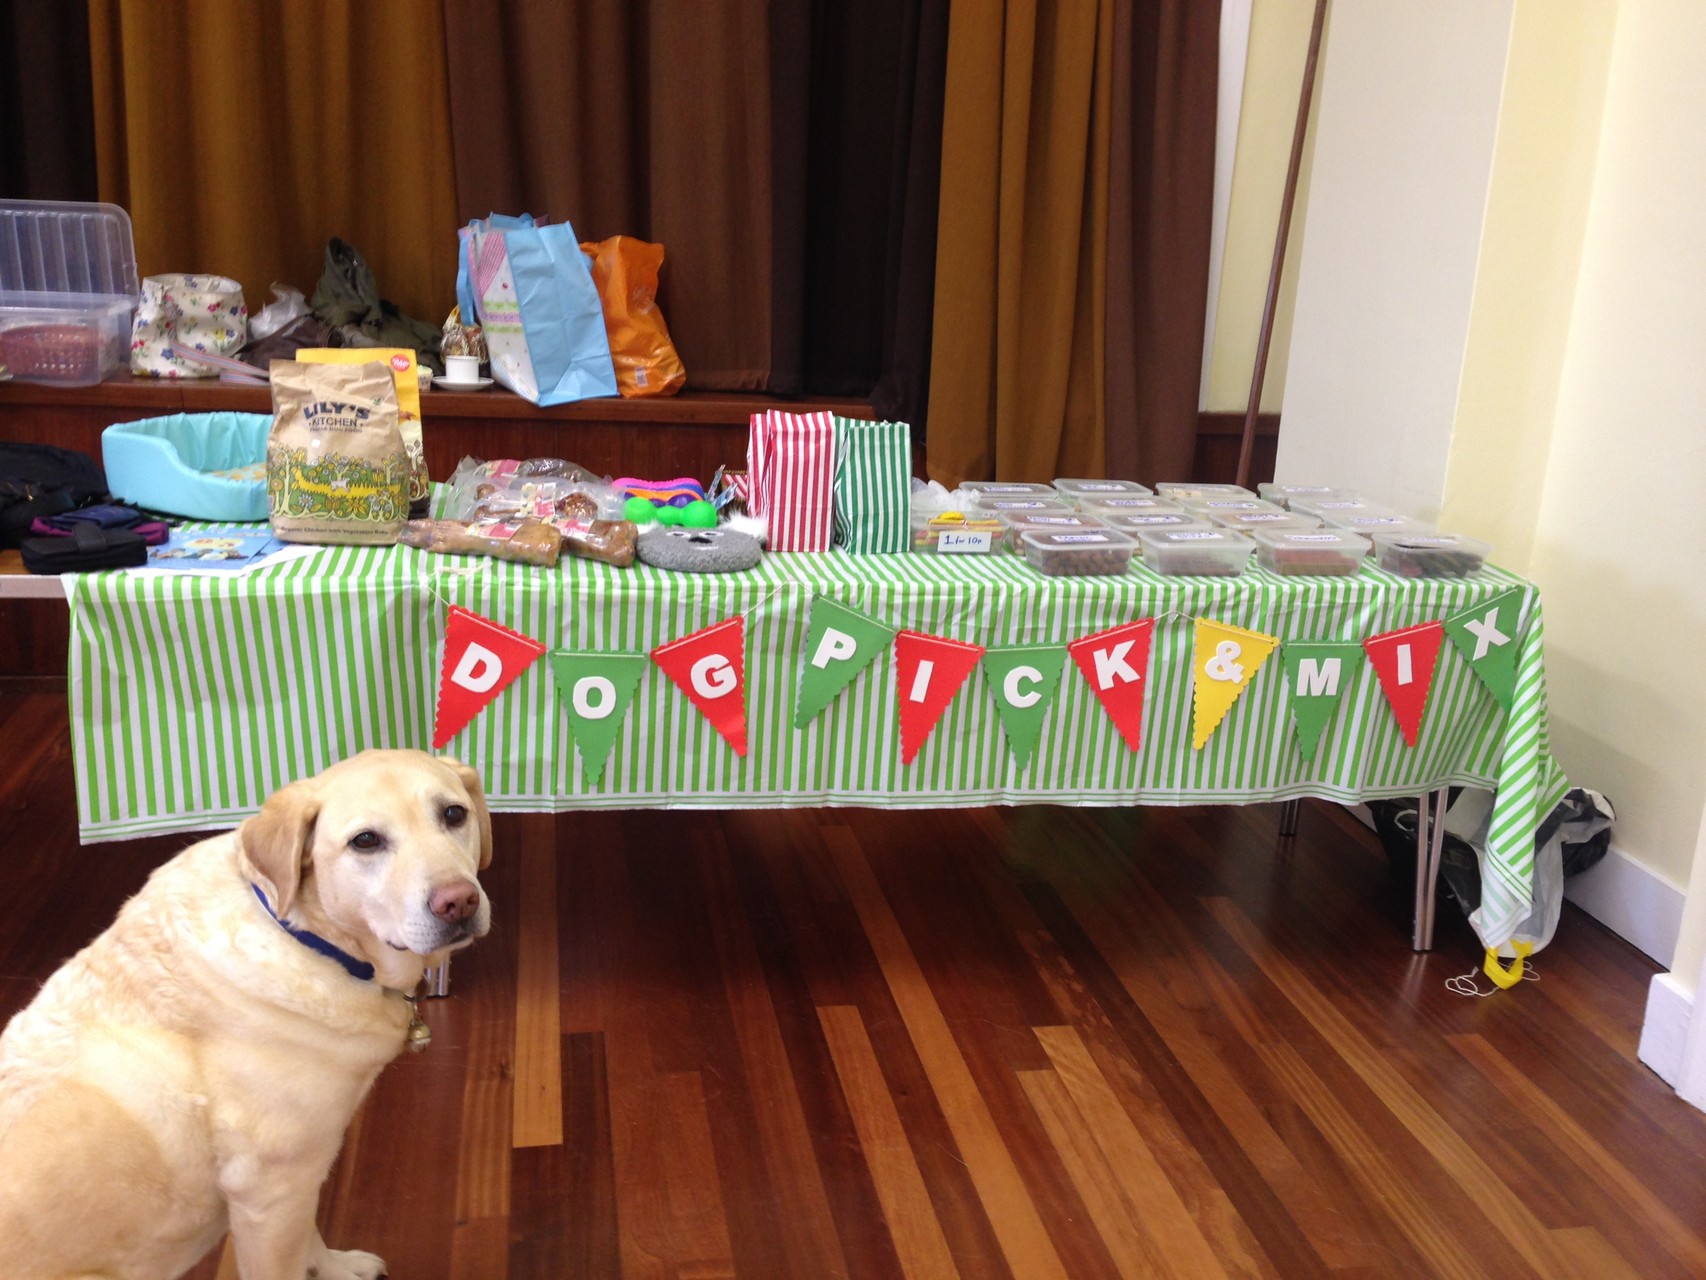 Looking hopeful at the doggy pick and mix stall